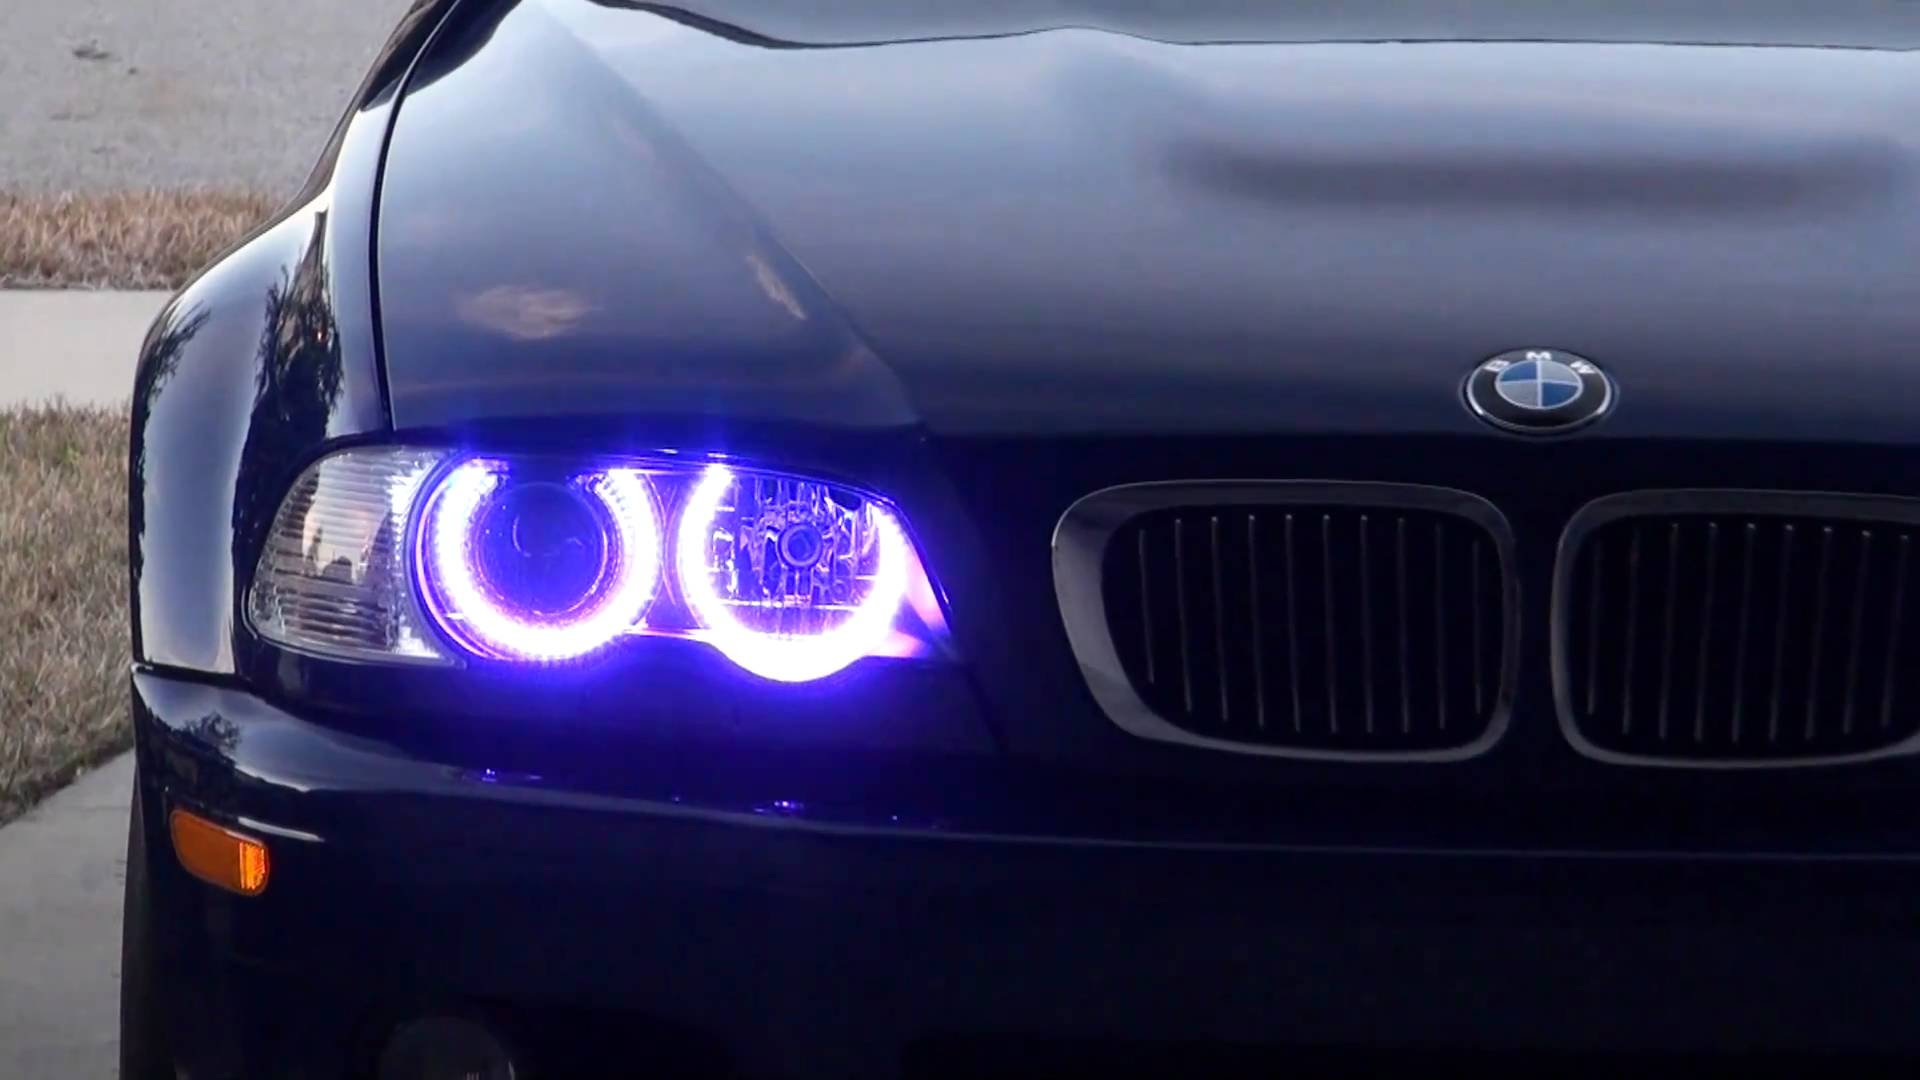 A BMW is never complete without the angel eyes. 